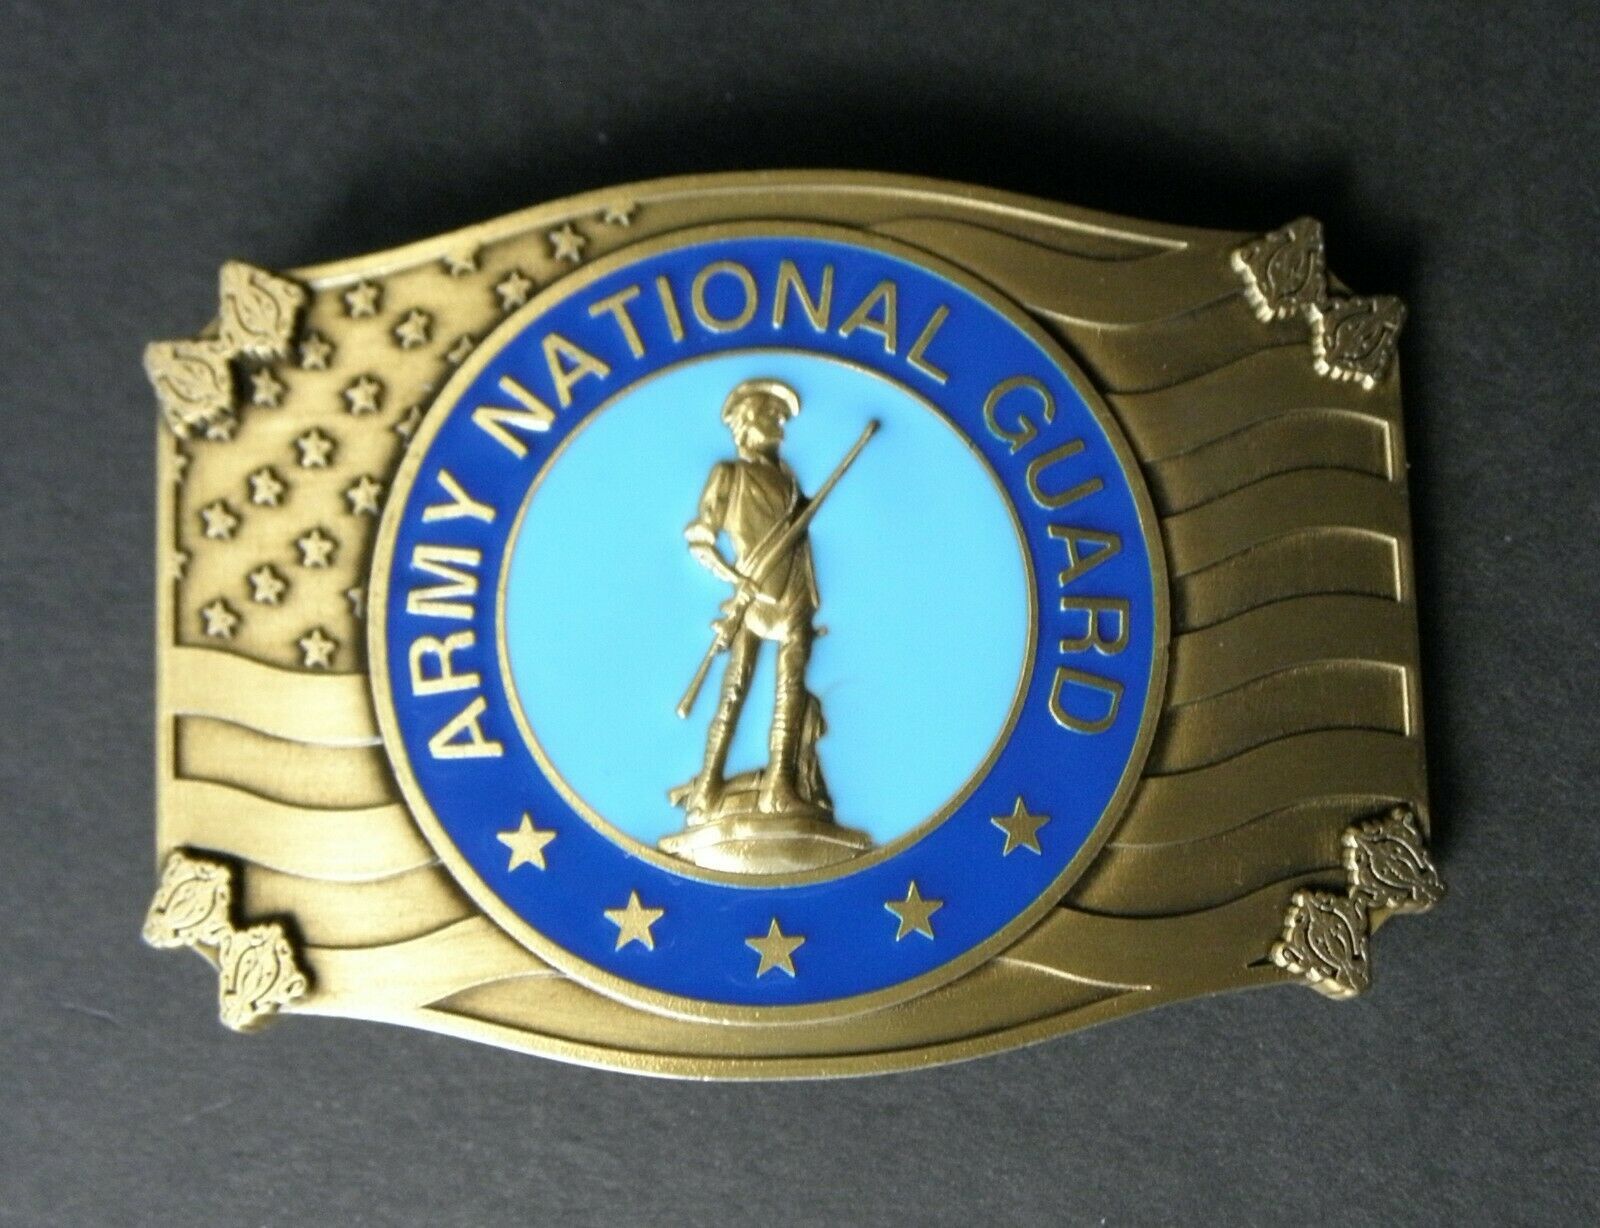 US ARMY NATIONAL GUARD BELT BUCKLE 3.2 INCHES USCG - $16.58